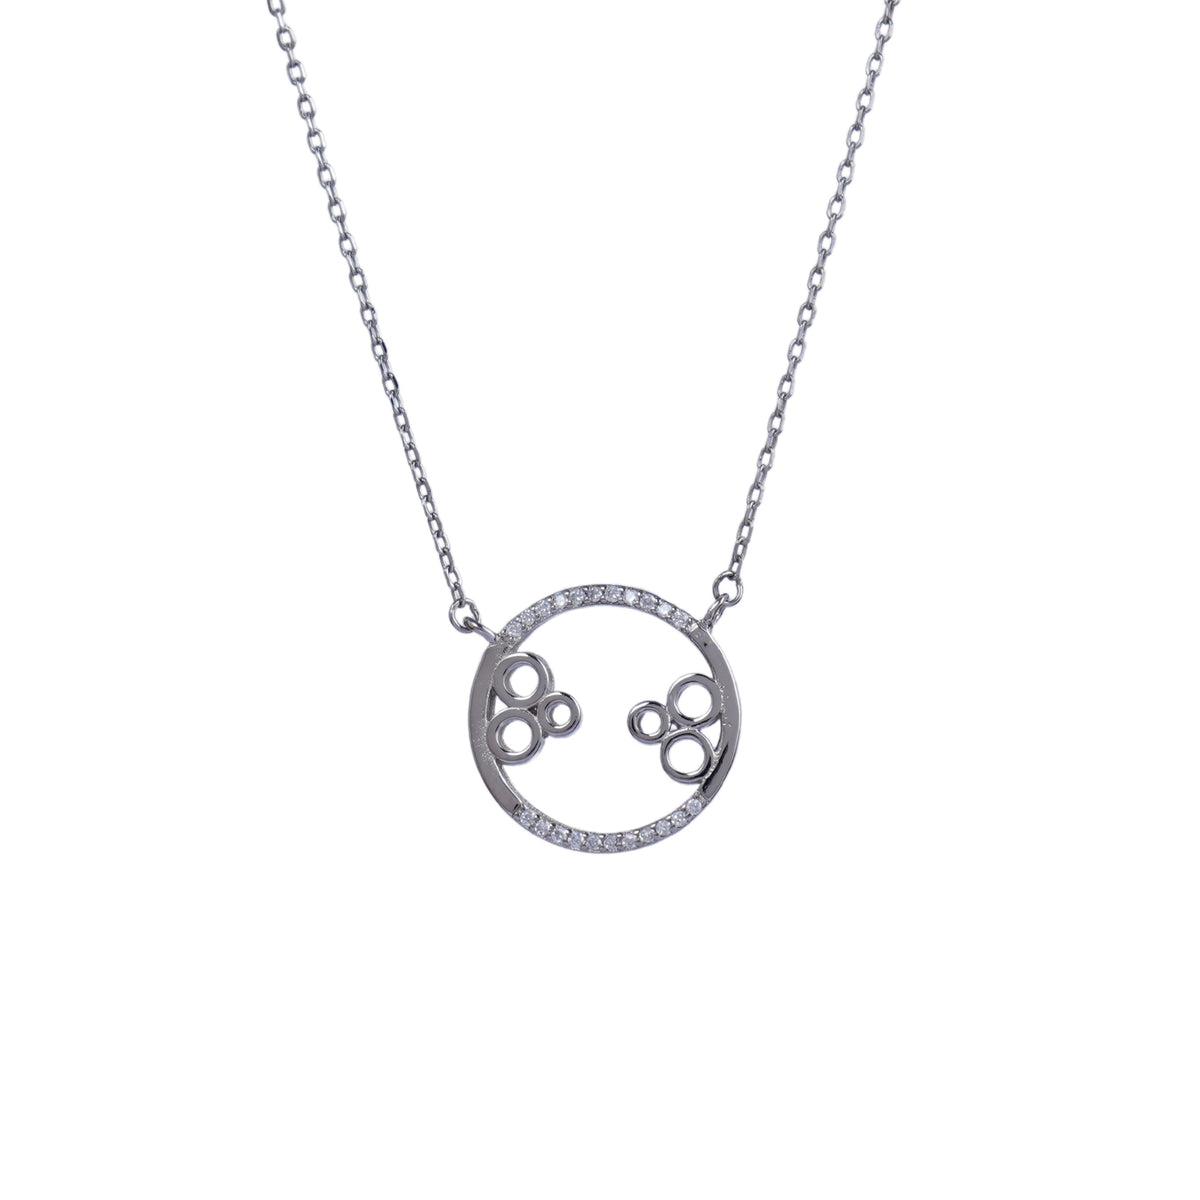 Silver Interlinked Circles Chain Pendant